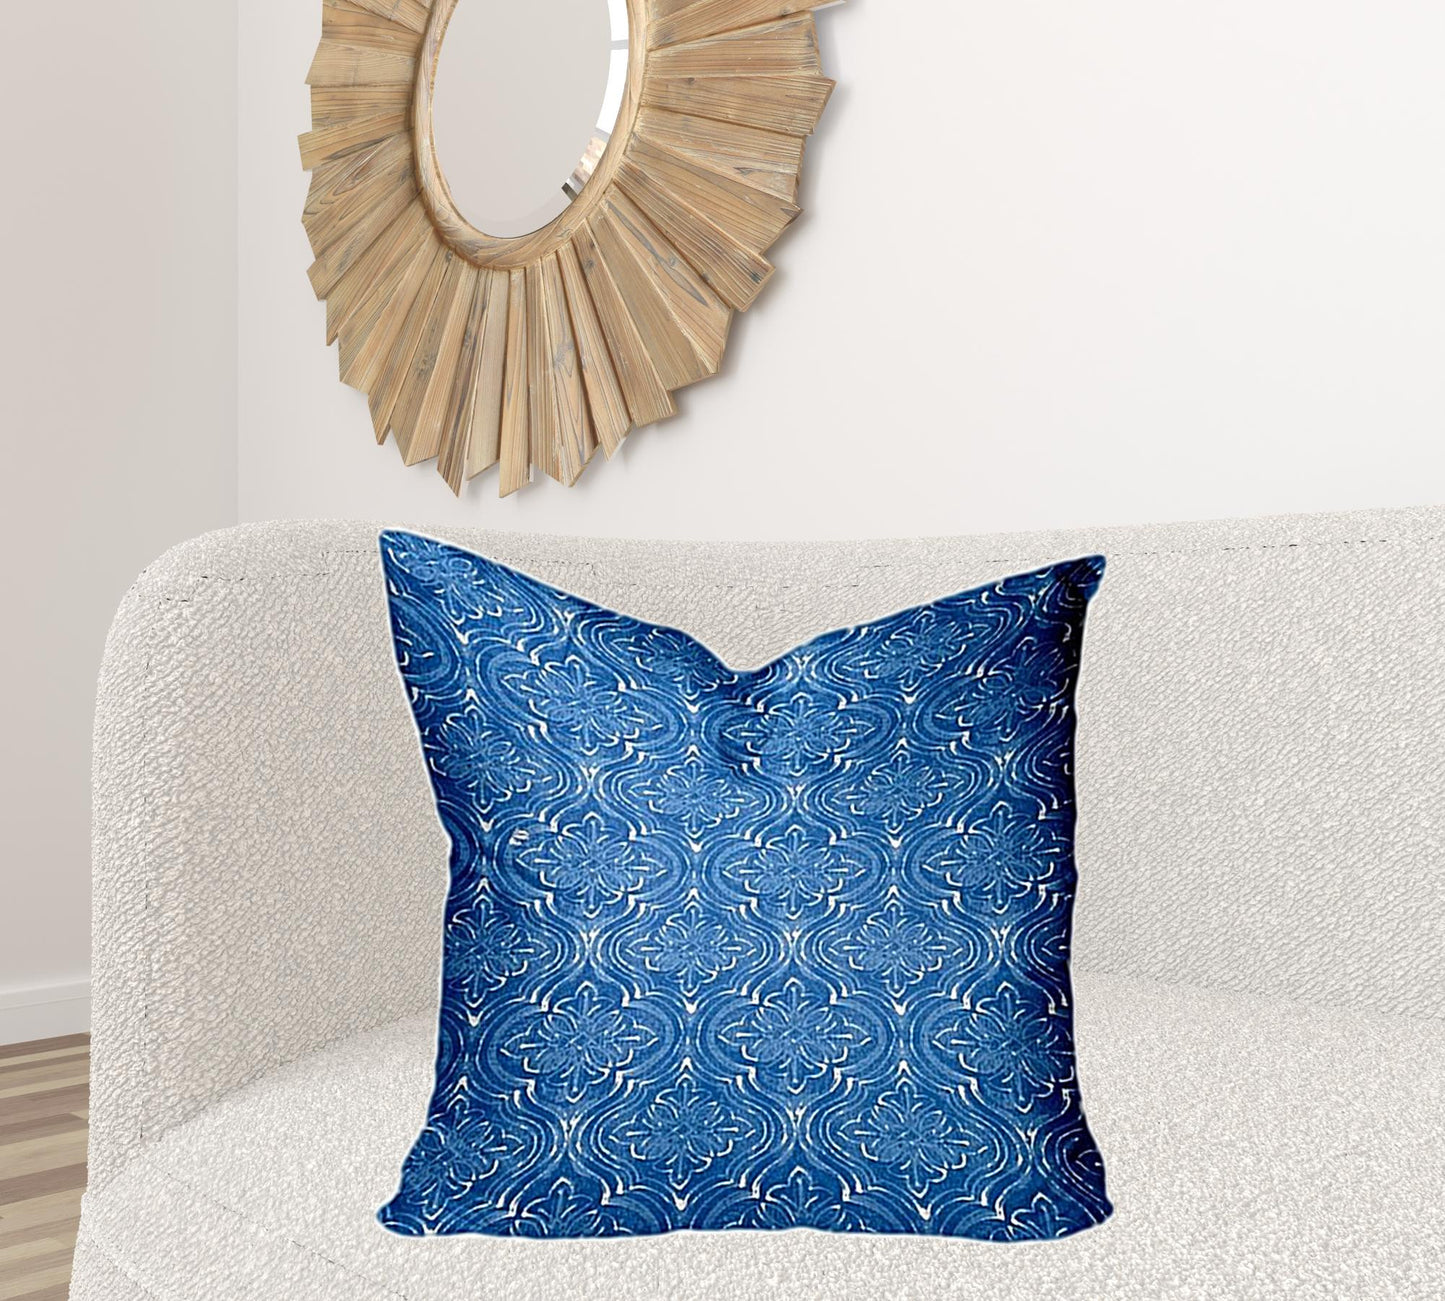 26" X 26" Blue And White Enveloped Ikat Throw Indoor Outdoor Pillow Cover